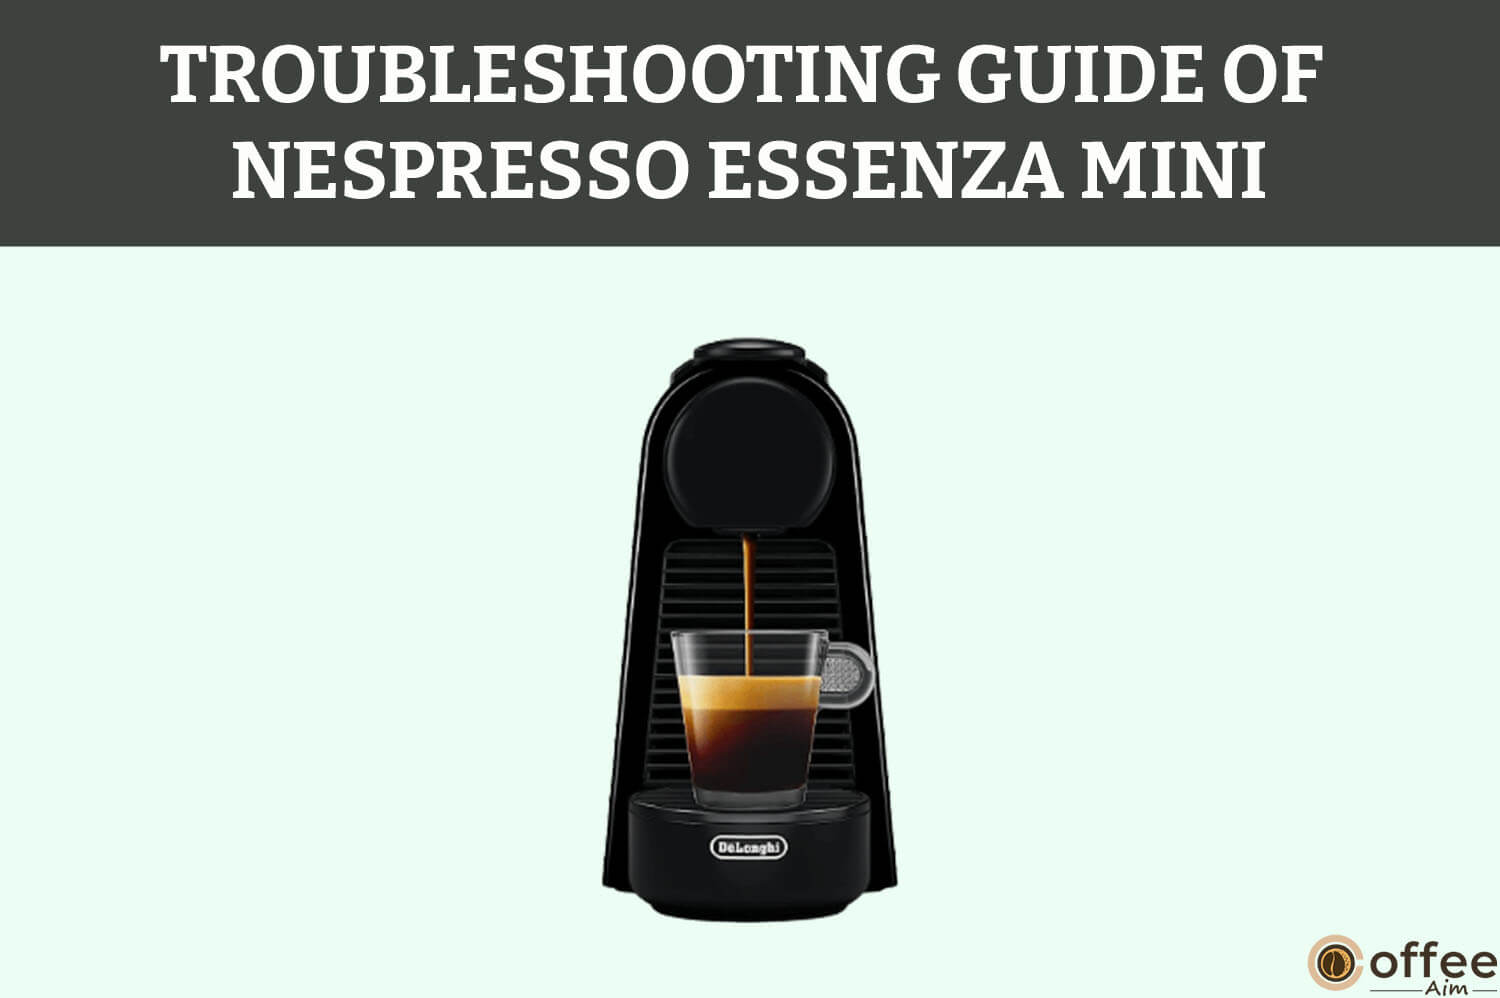 Featured image for the article "Troubleshooting guide of Nespresso Essenza Mini"